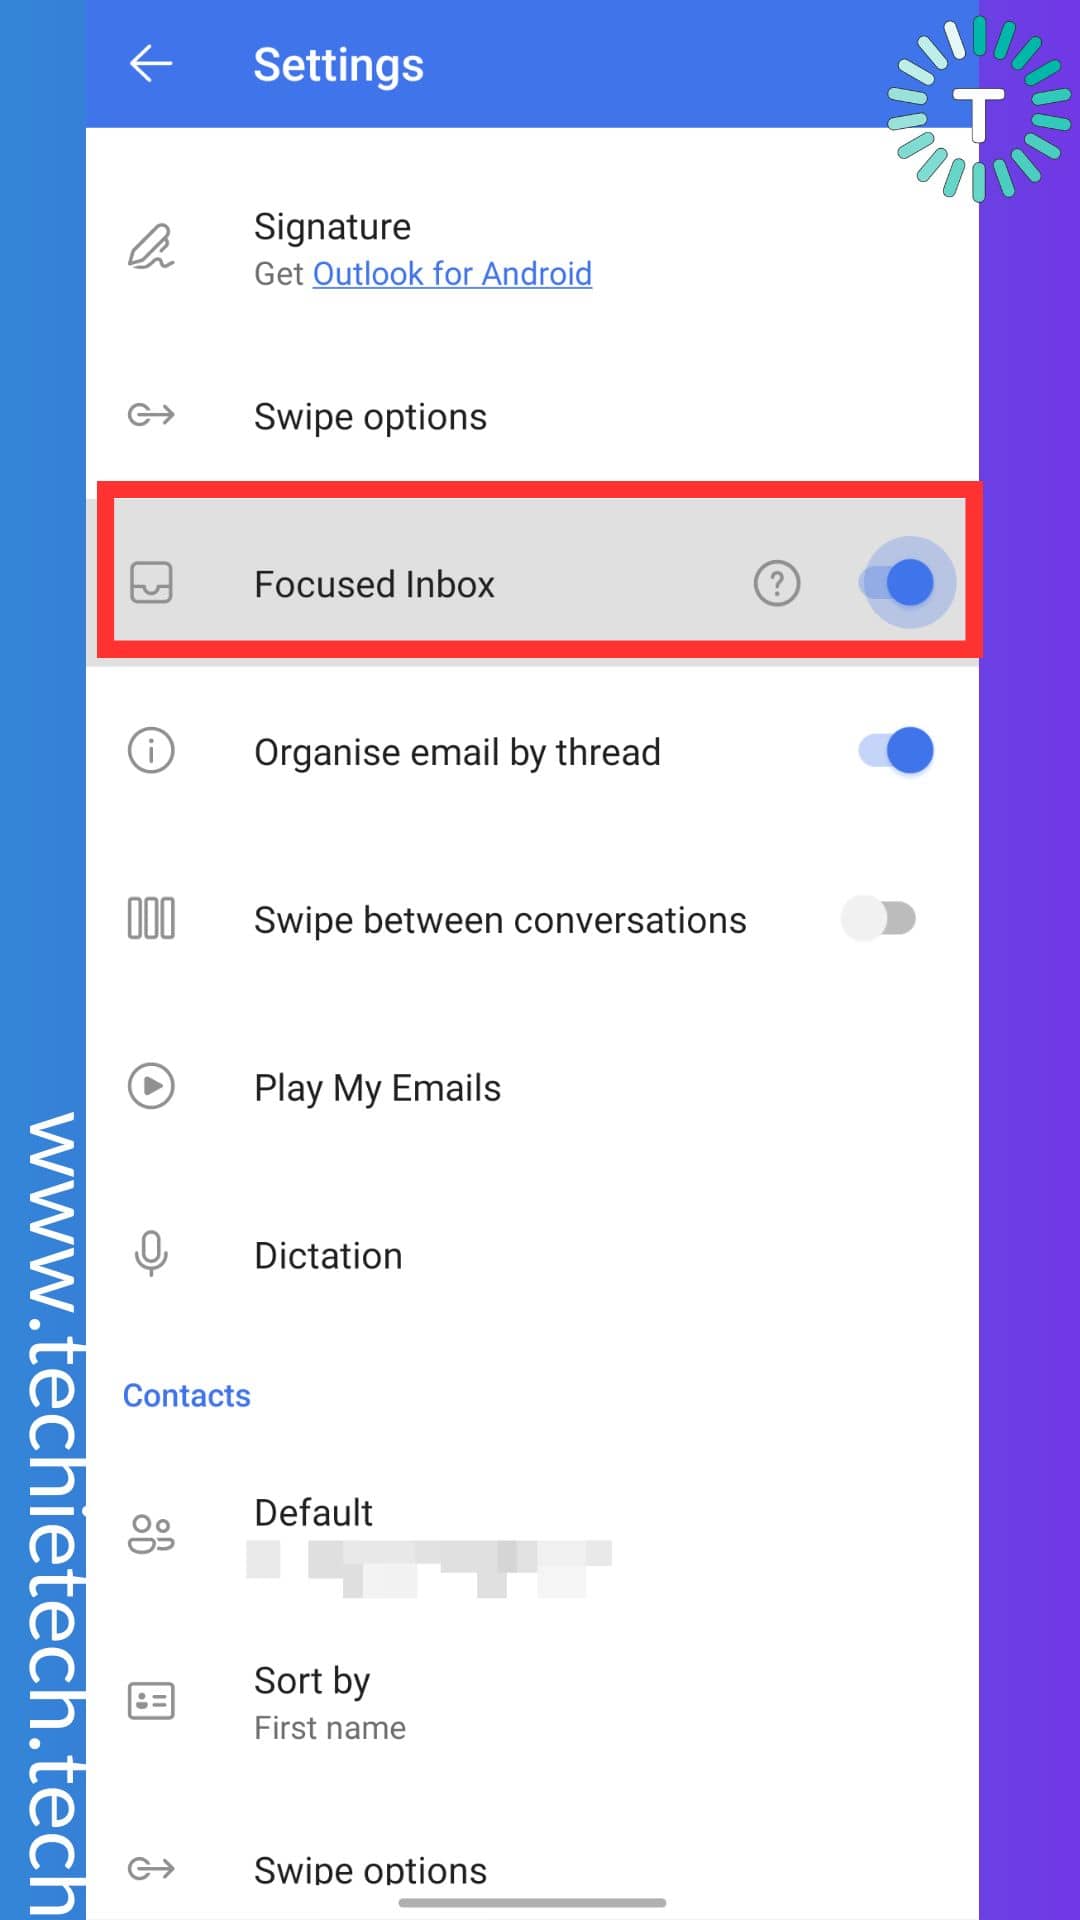 Toggle the switch to disable Focus Inbox 